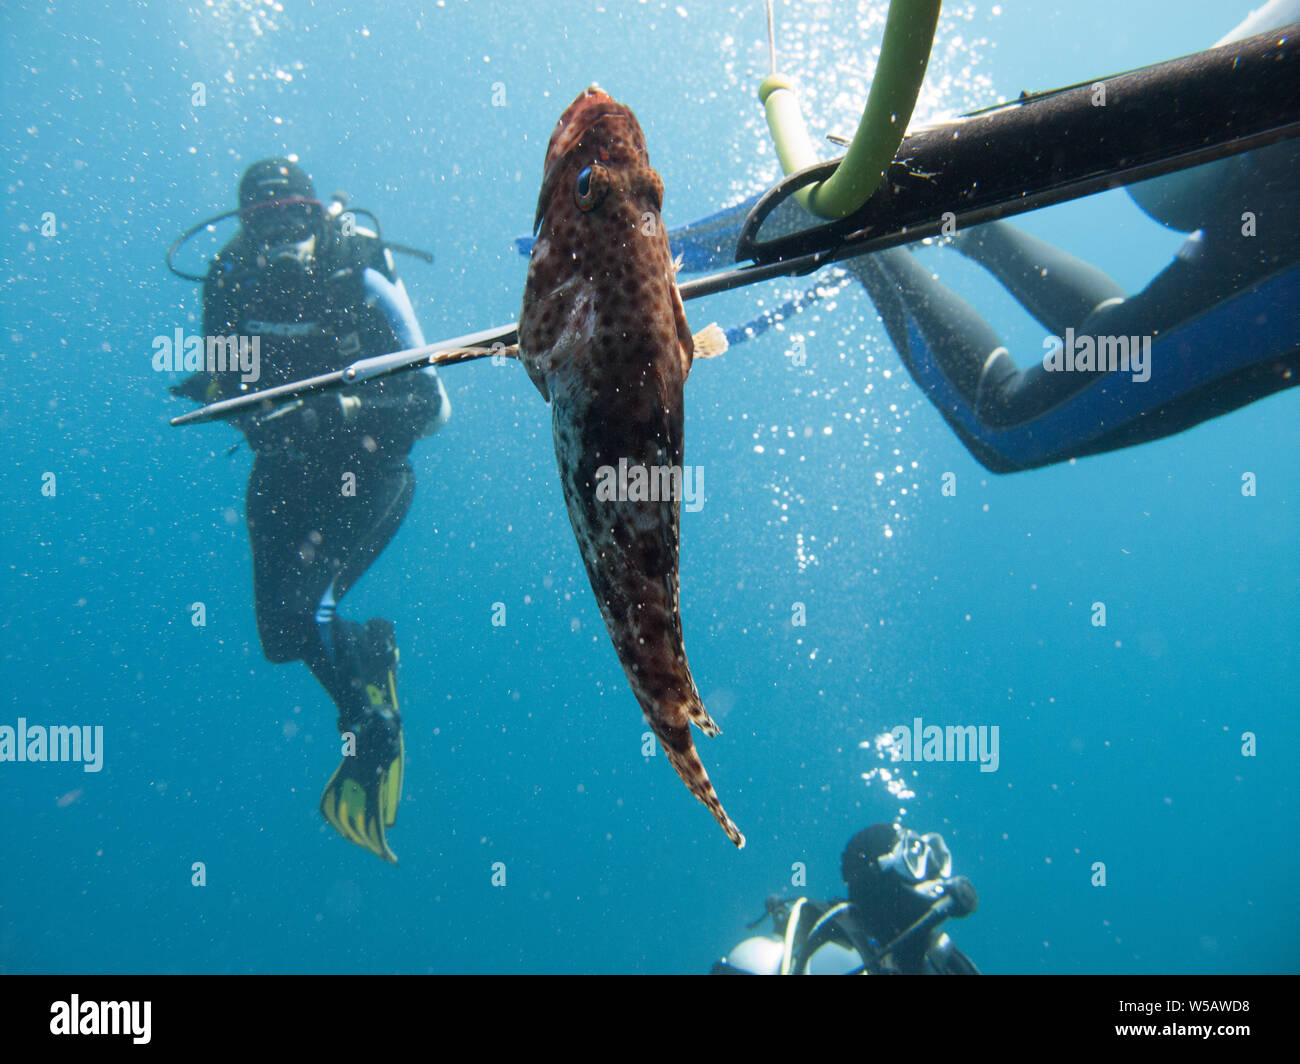 A diver fishing with harpoon irregularly a fish (Hemichromis